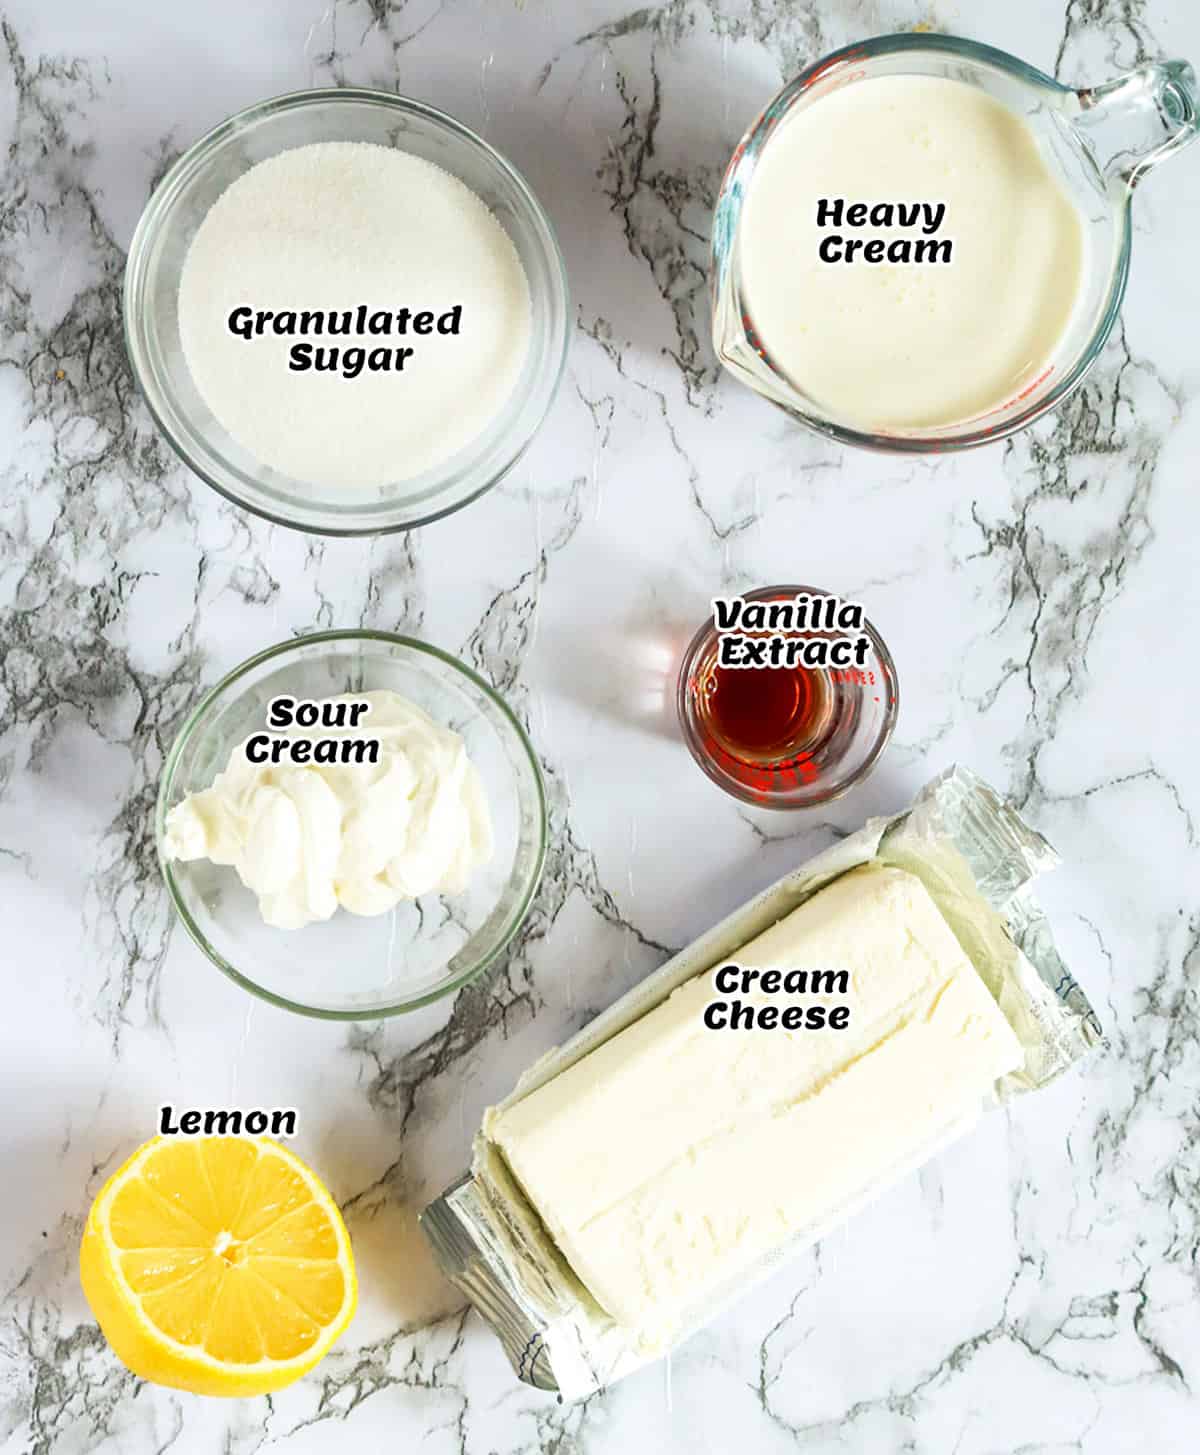 What you need to make the filling for no-bake cheesecake bites